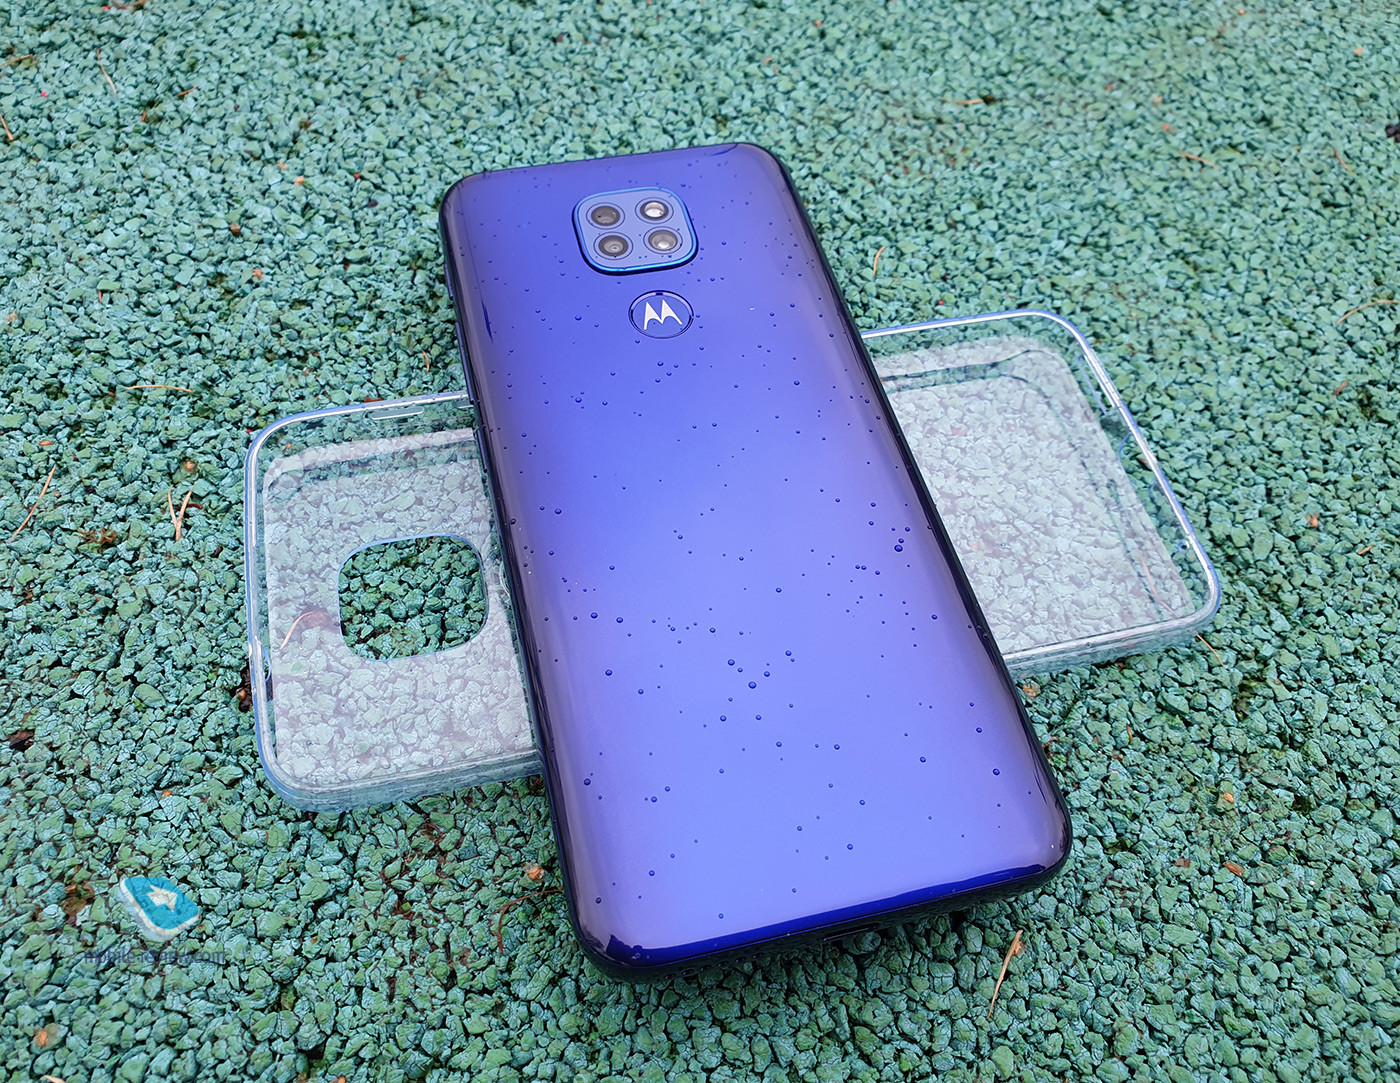 Motorola Moto G9 Play review: a reliable thoroughbred workhorse